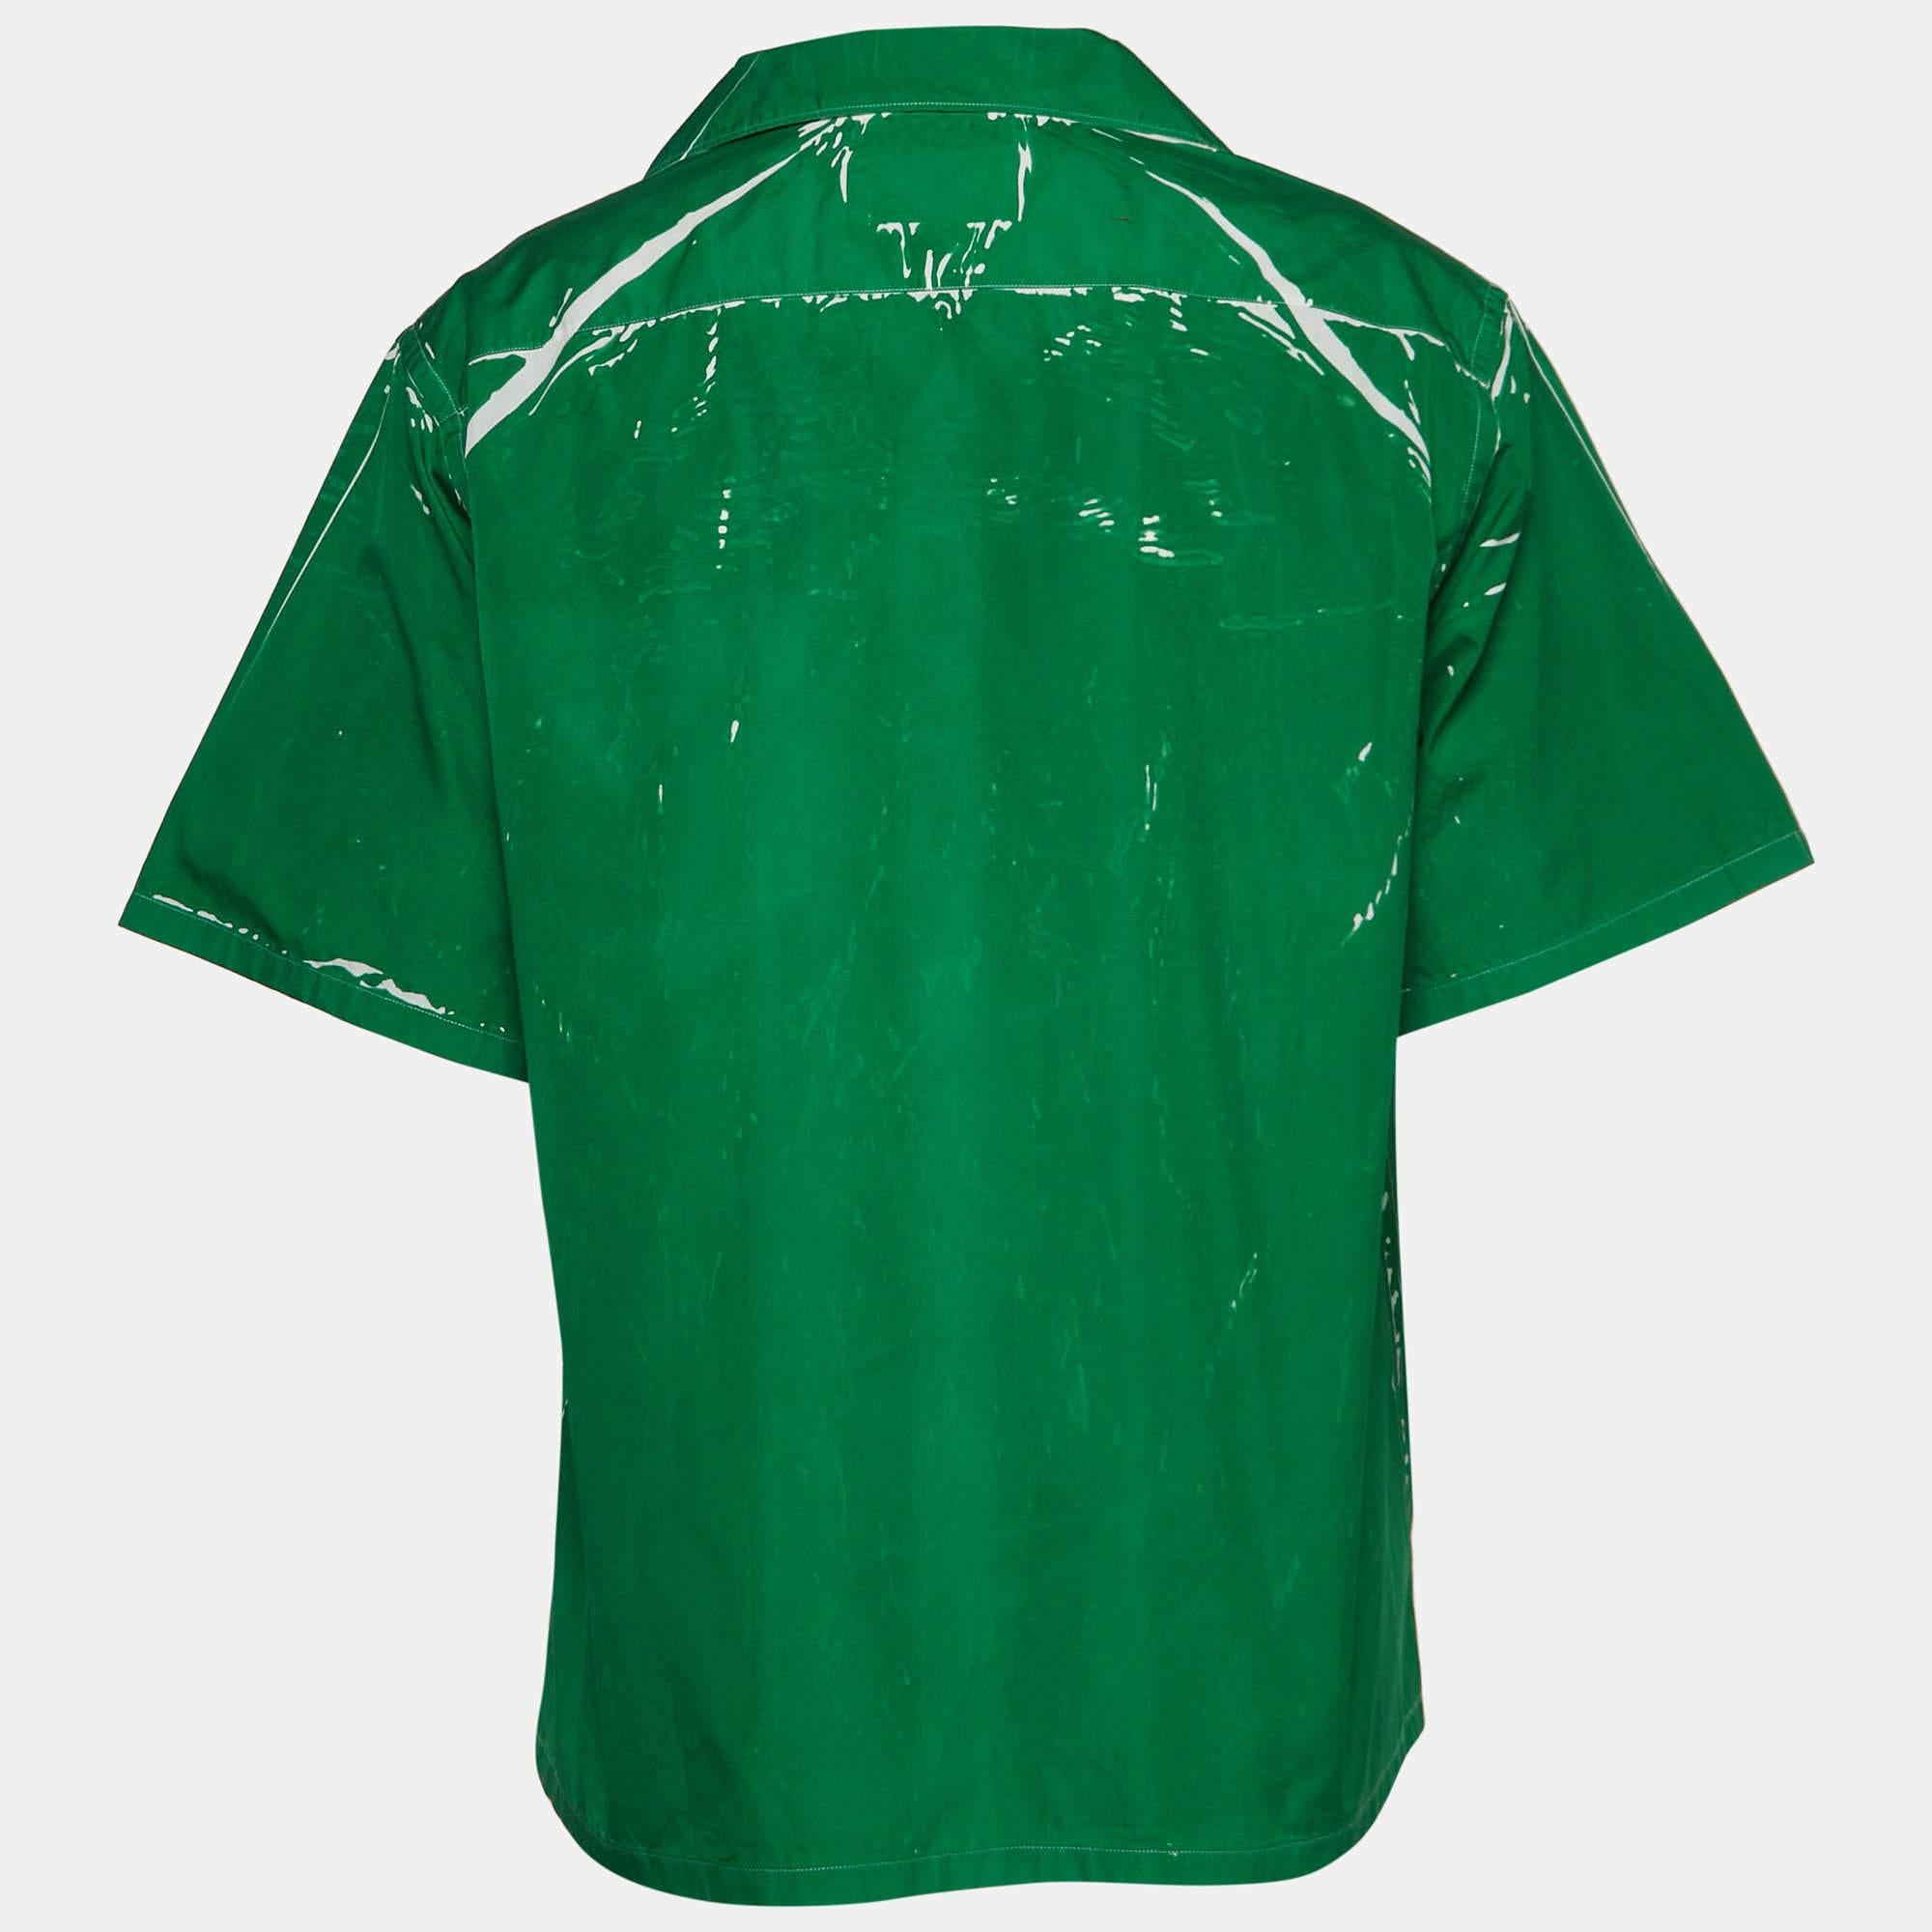 The Prada bowling shirt epitomizes casual elegance. Crafted from premium cotton, it features a vibrant green hue adorned with subtle prints. The relaxed bowling shirt silhouette is complemented by a button-down front, short sleeves, and a